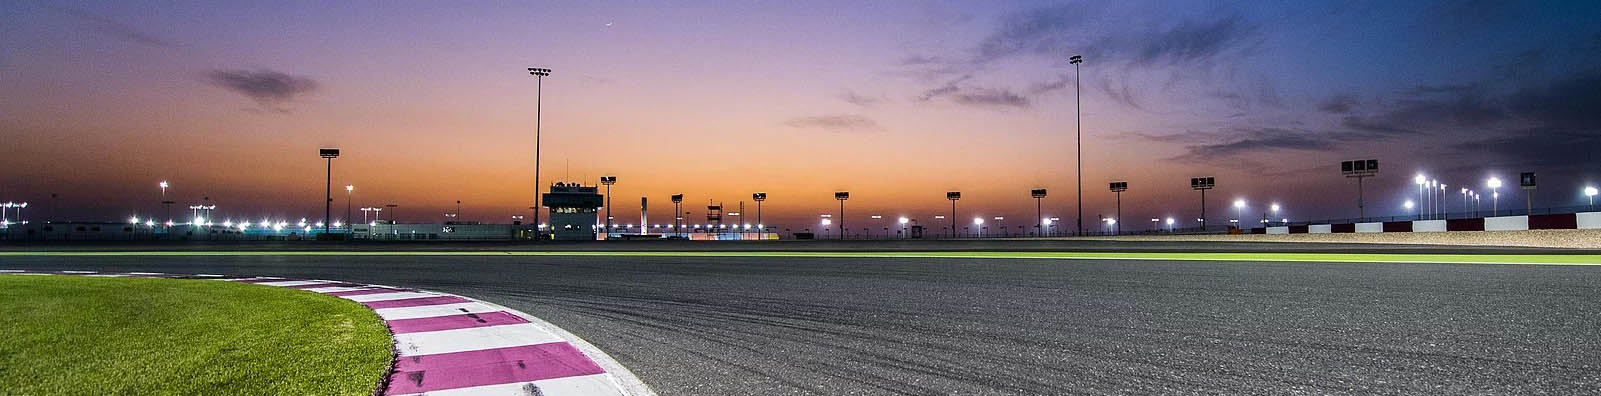 Viñales keeps his view from the top on opening day in Lusail